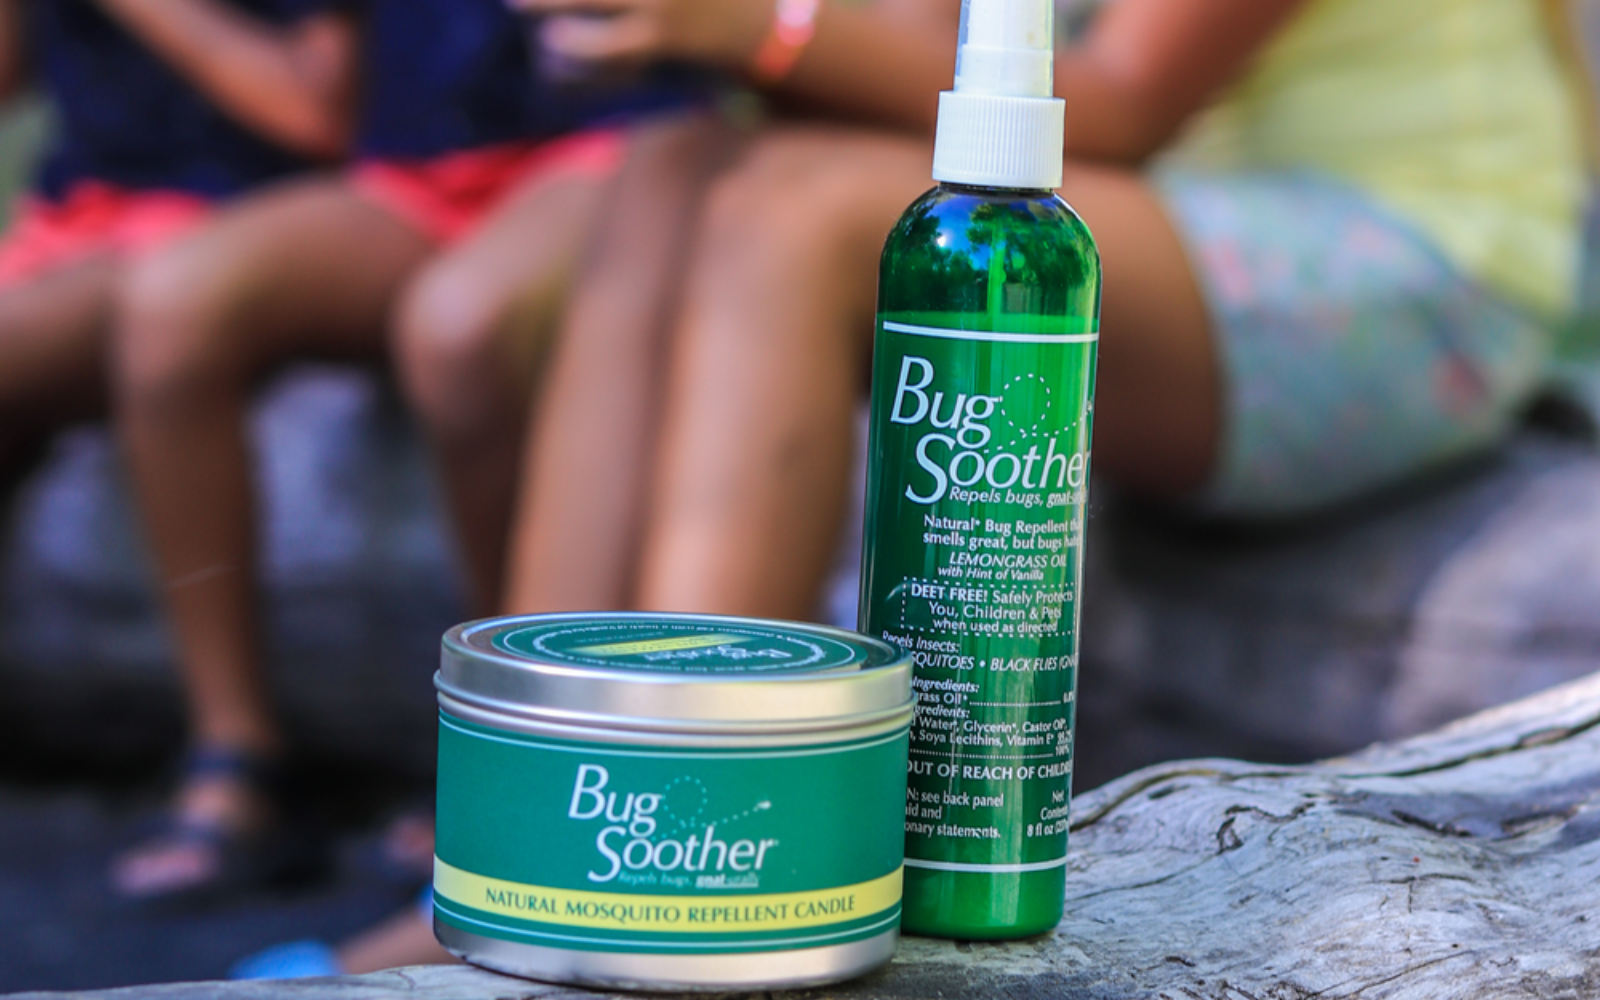 Bug Soother, Natural Insect Repellent